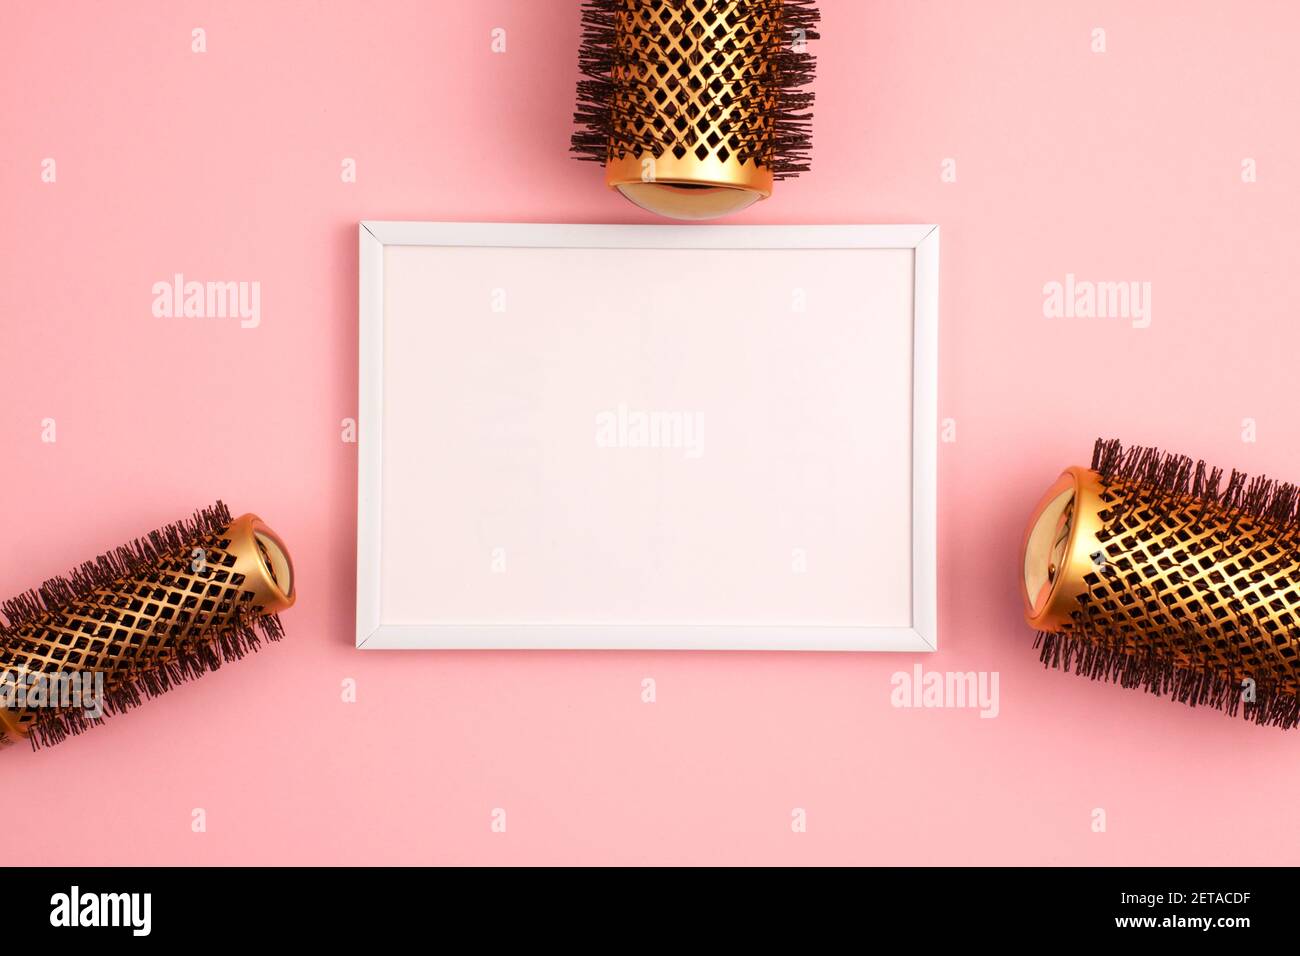 Plastic frame flat lay of set of professional gold round hair brushes for styling at the right of the image template with copy space on pink. Hairdres Stock Photo